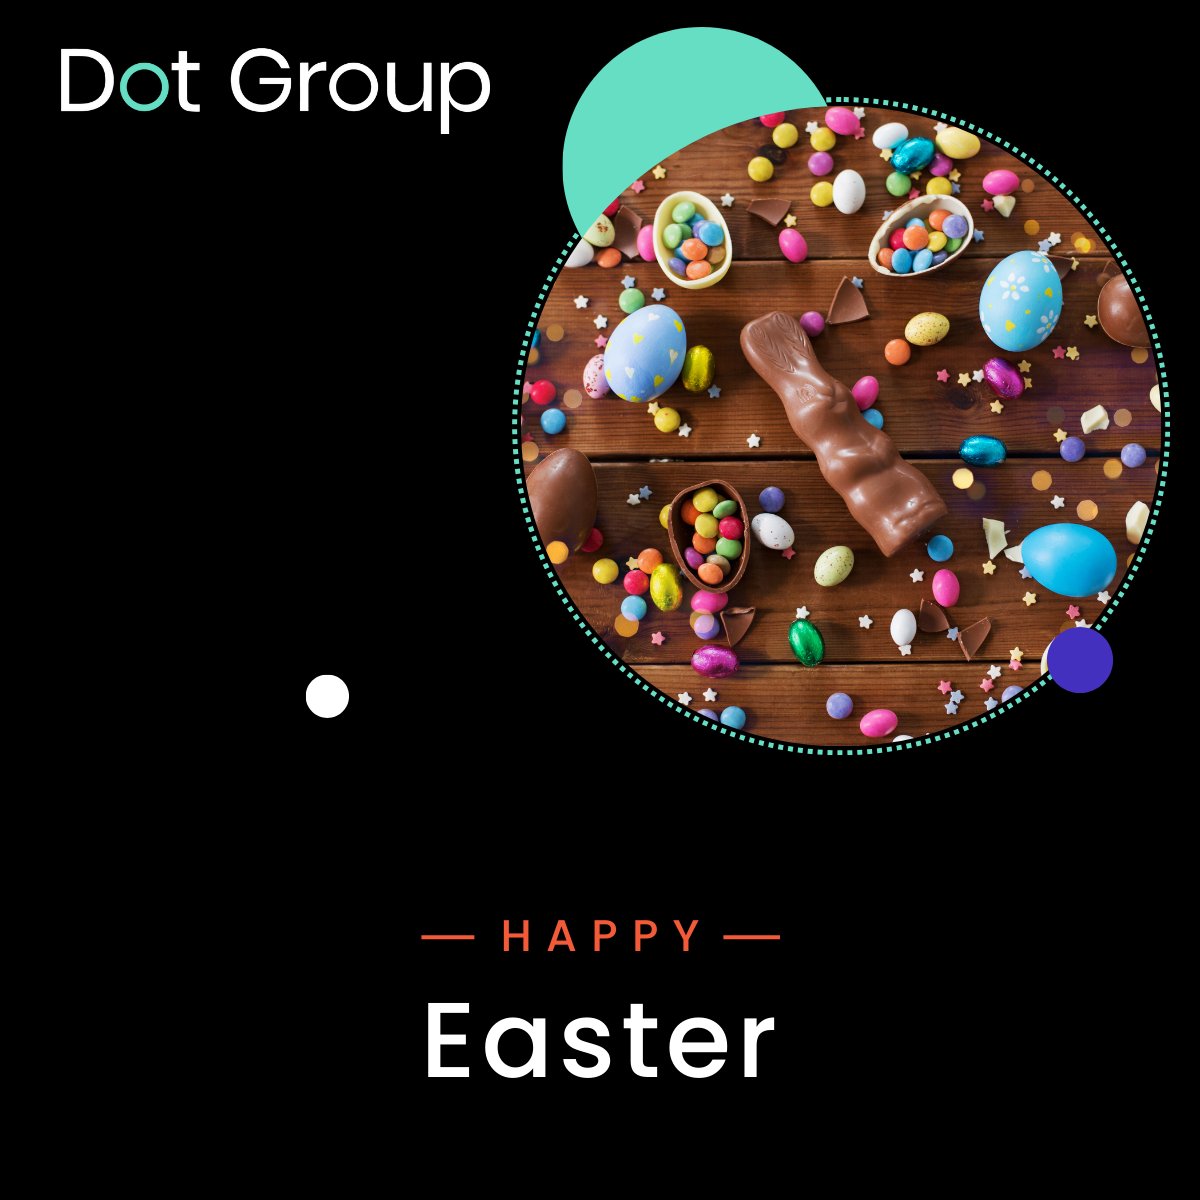 Easter is a time for new beginnings and fresh ideas. Happy Easter from the Dot Group team!